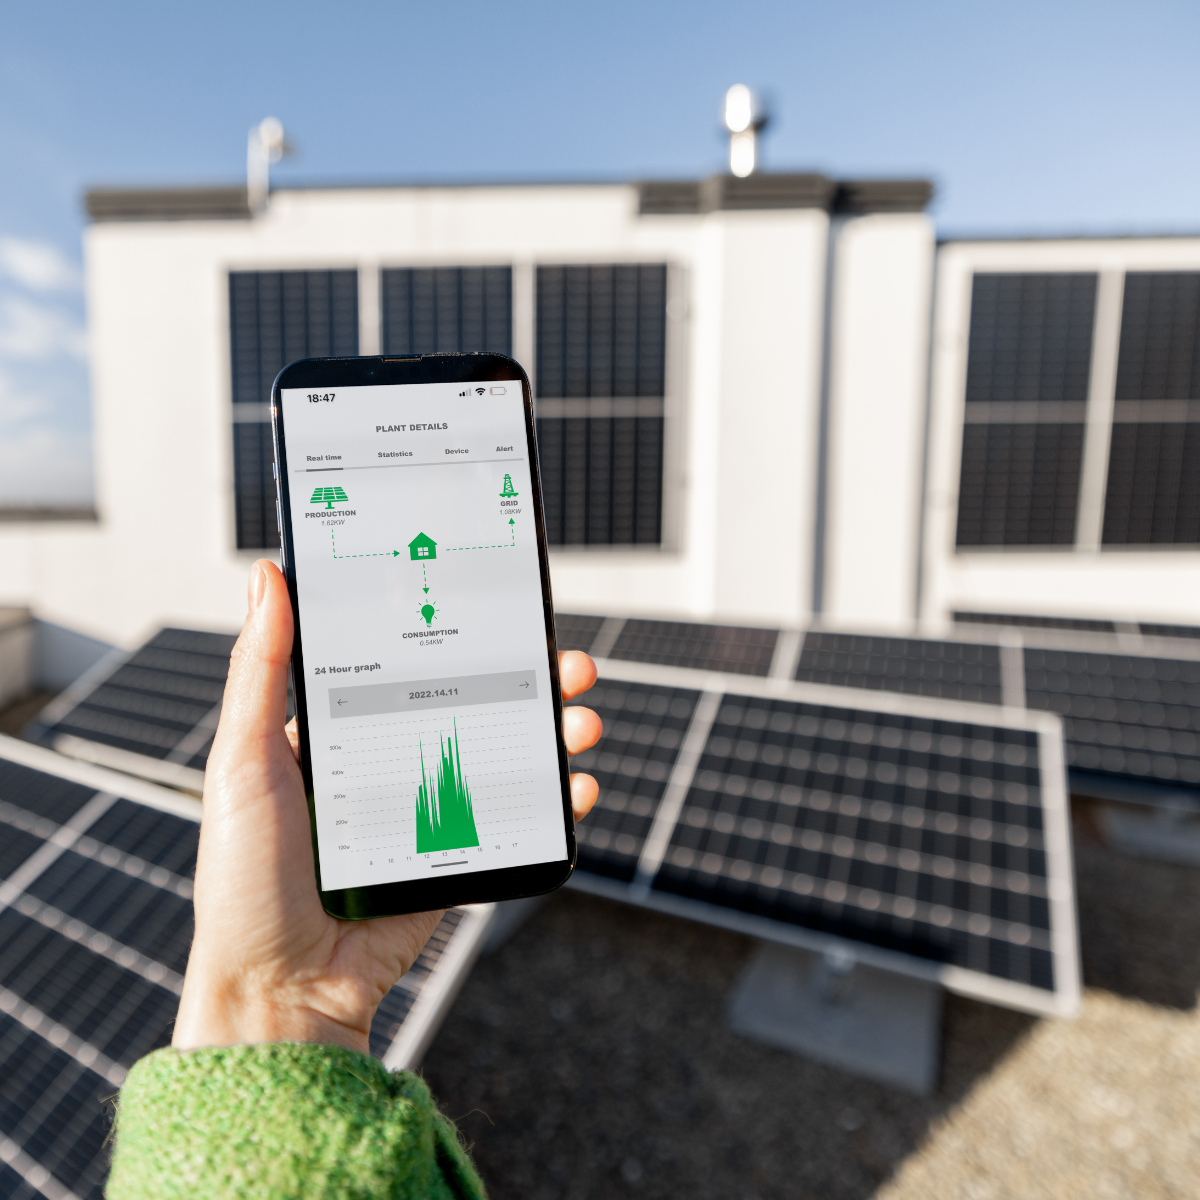 Learn what a solar monitoring system is, how it works, and its benefits. Optimize solar panel efficiency with real-time tracking and proactive maintenance.